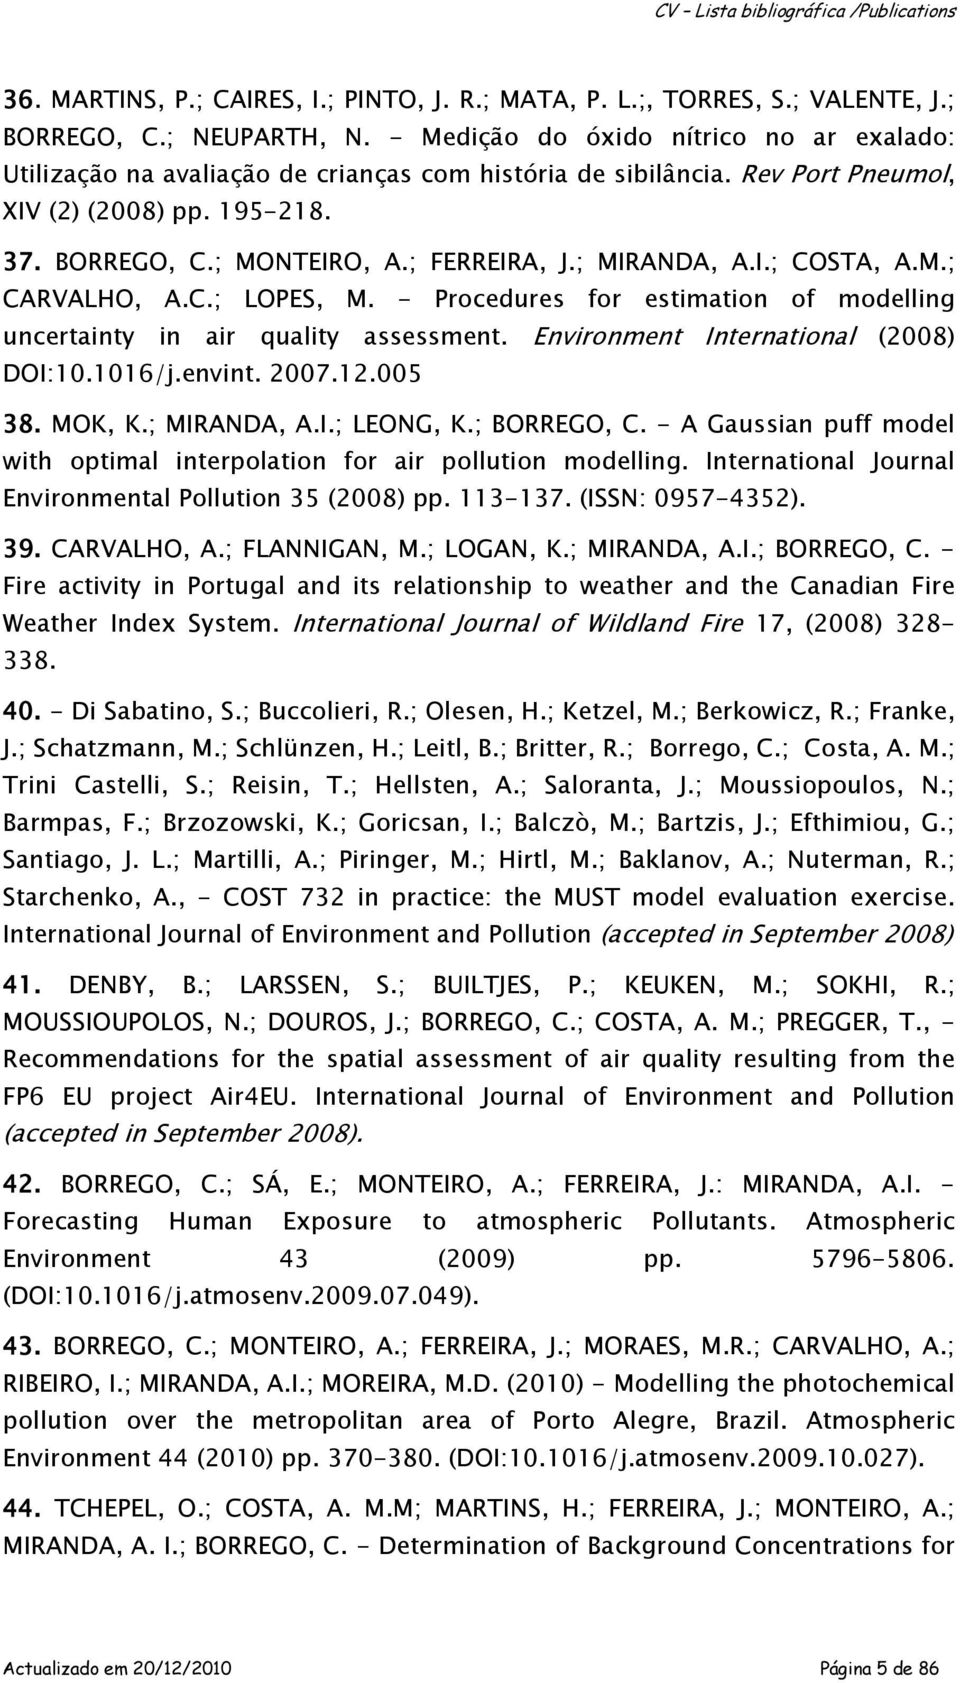 ; MIRANDA, A.I.; COSTA, A.M.; CARVALHO, A.C.; LOPES, M. - Procedures for estimation of modelling uncertainty in air quality assessment. Environment International (2008) DOI:10.1016/j.envint. 2007.12.